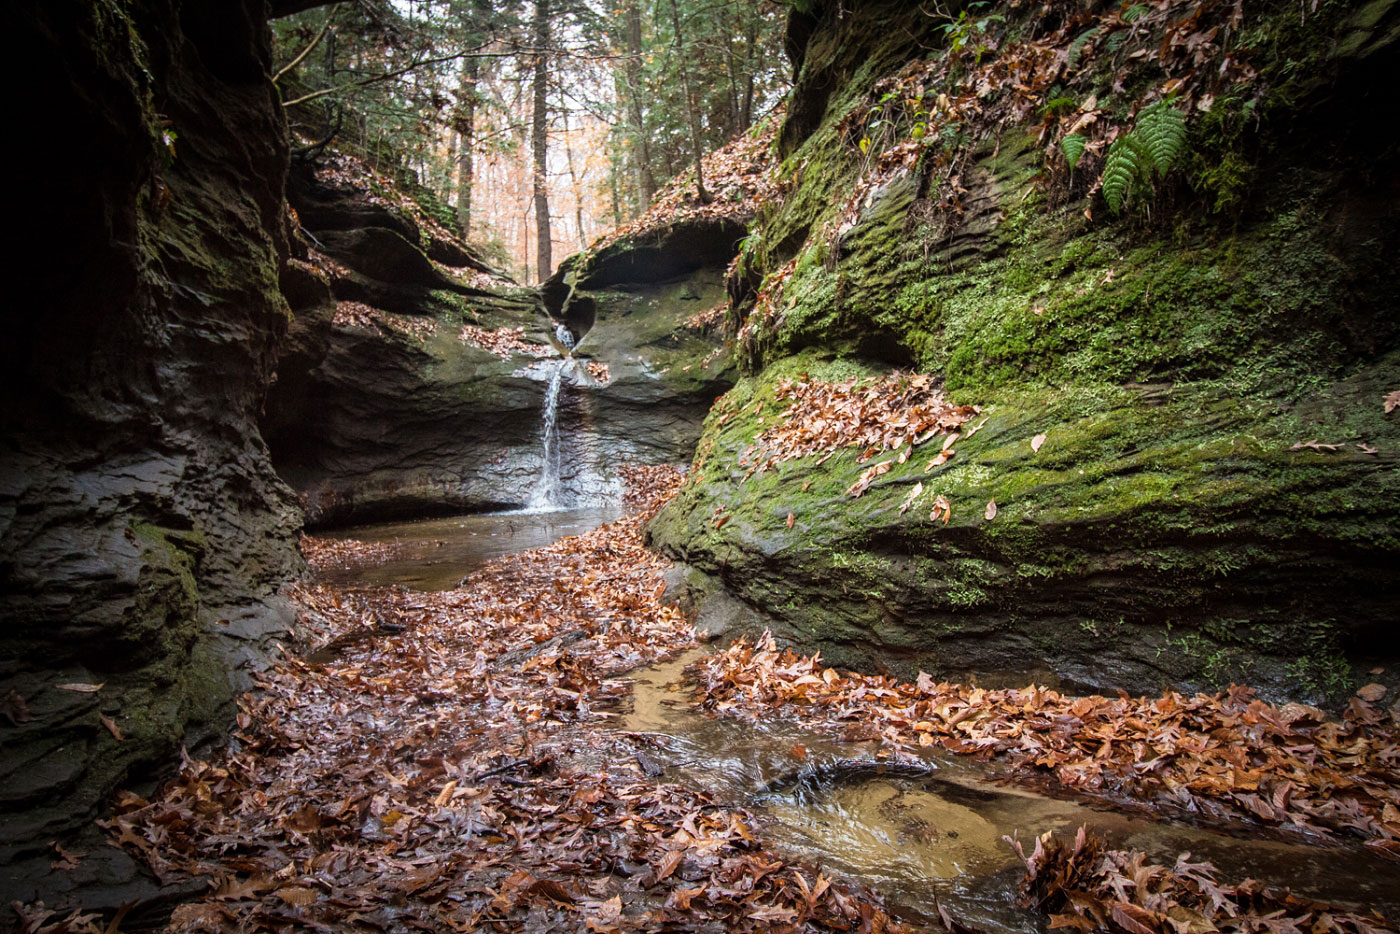 Hike Rocky Hollow Falls Canyon Loop in Turkey Run State Park, Indiana - Stav is Lost